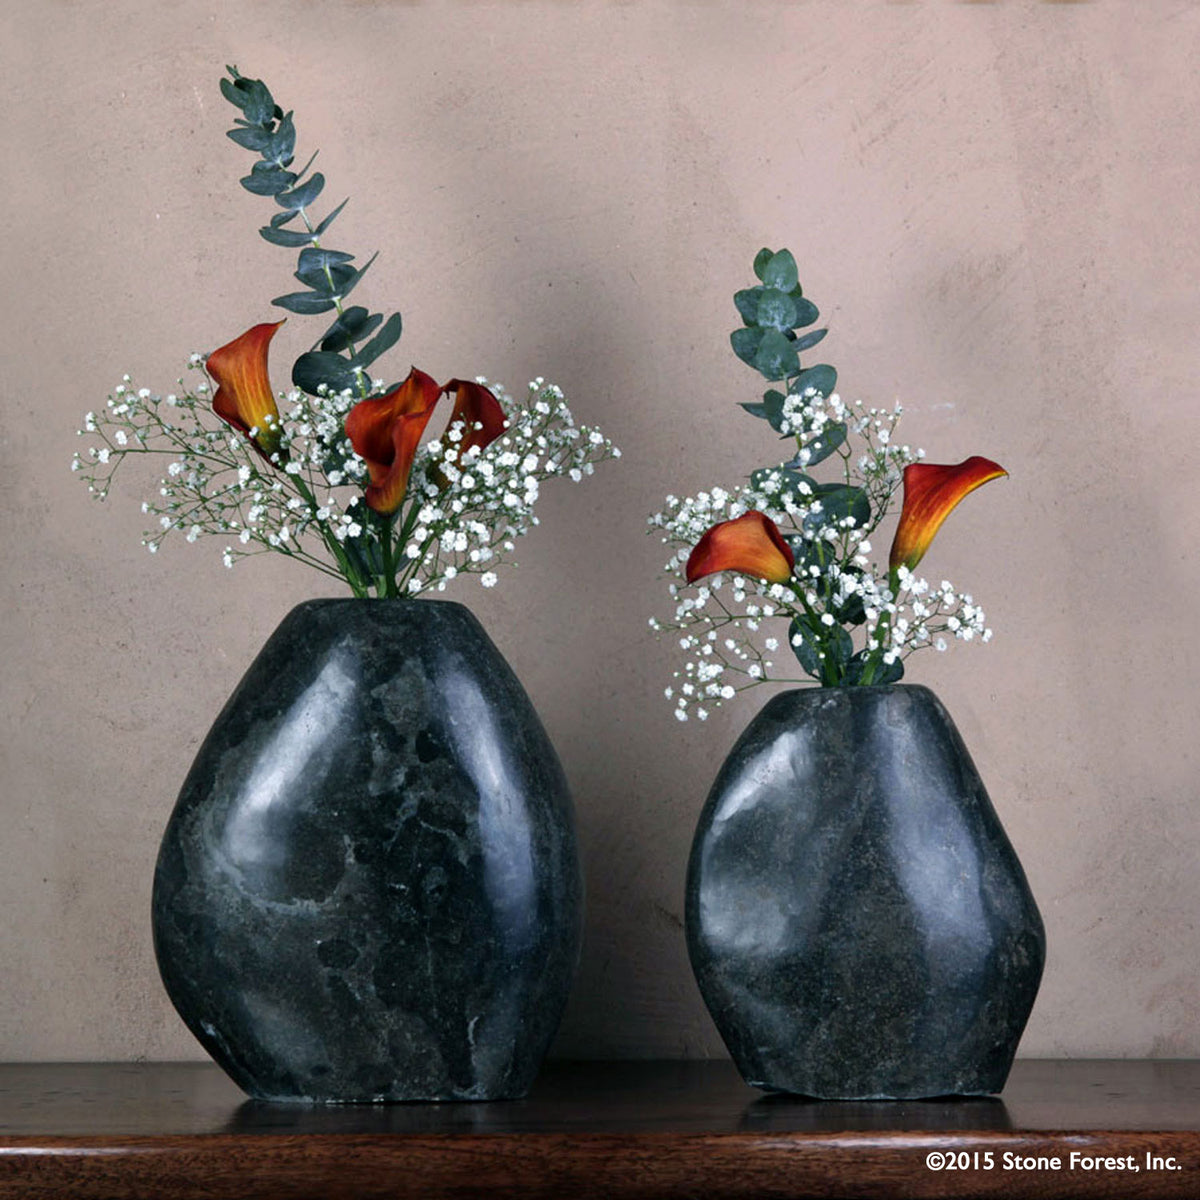 Stone Forest Pebble Vases image 3 of 3